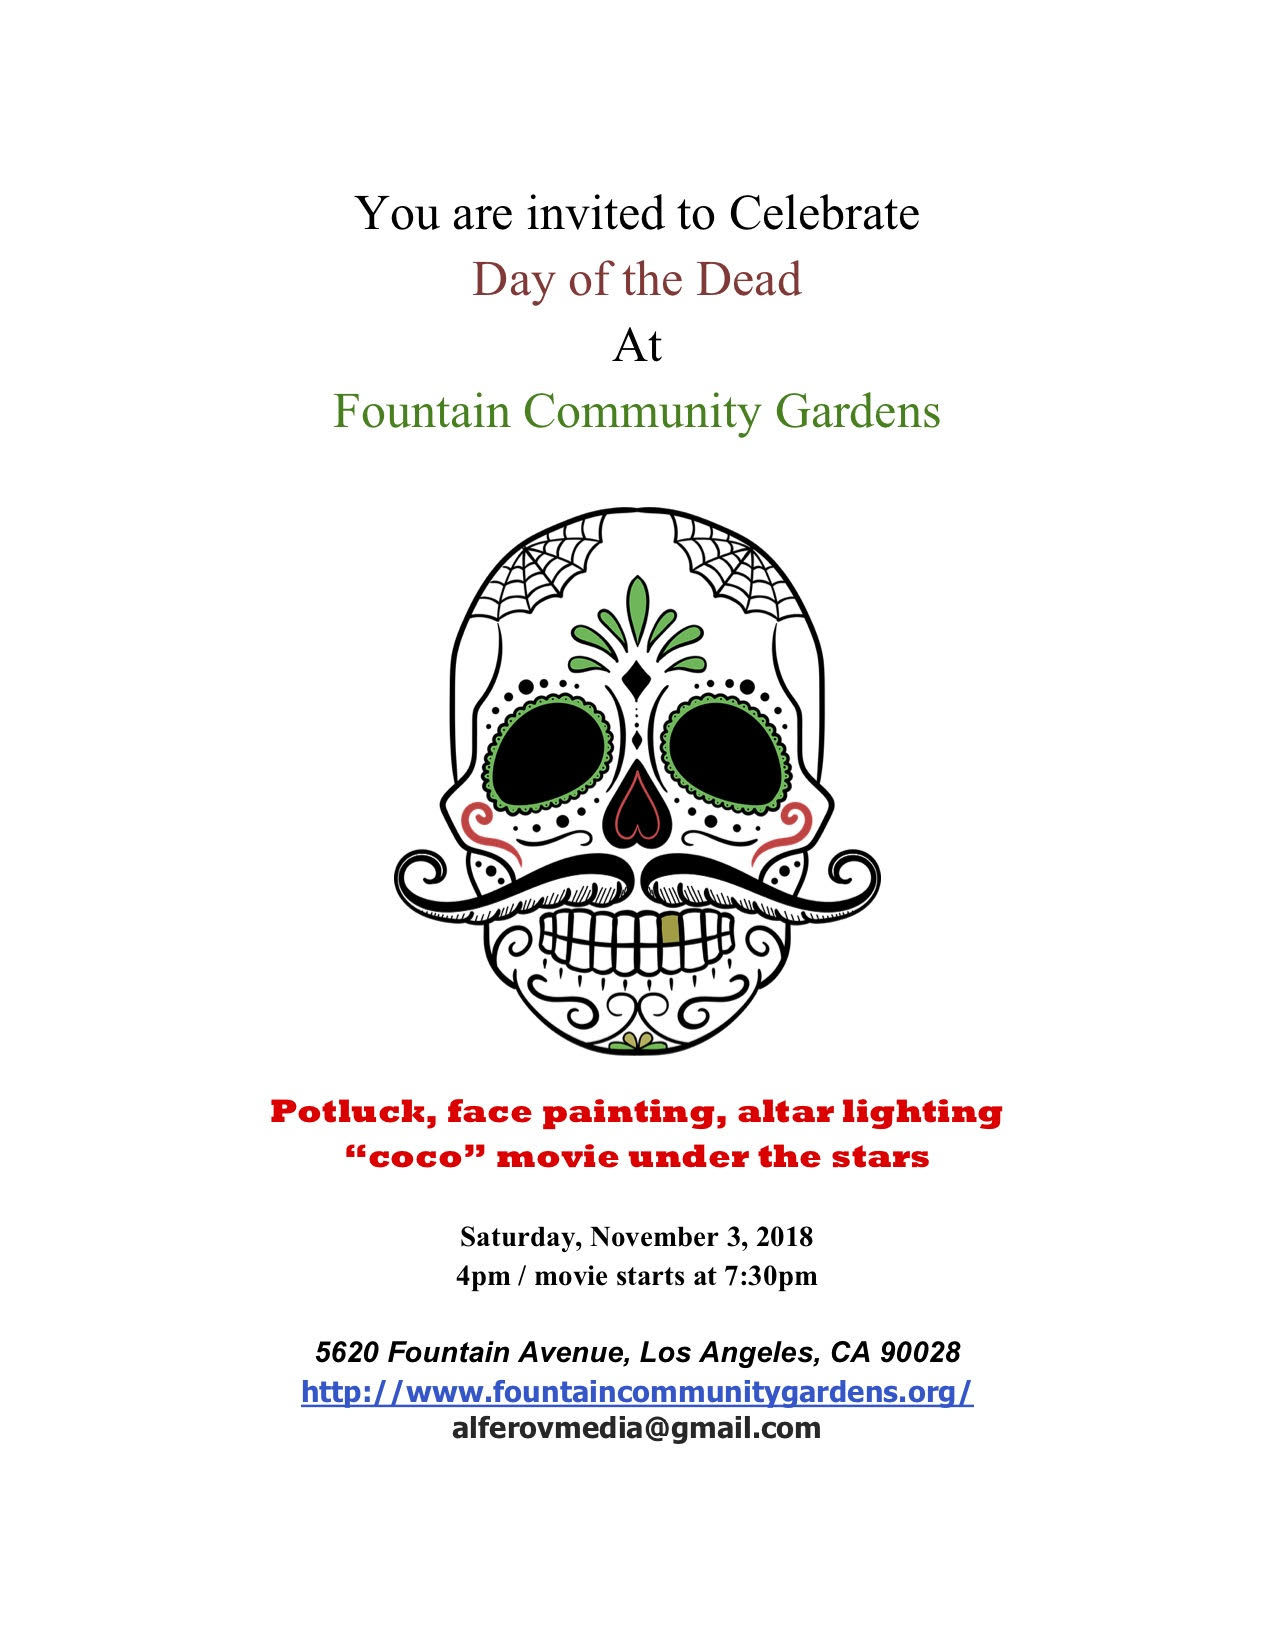 Image for Day of the Dead Celebration with Fountain Communit